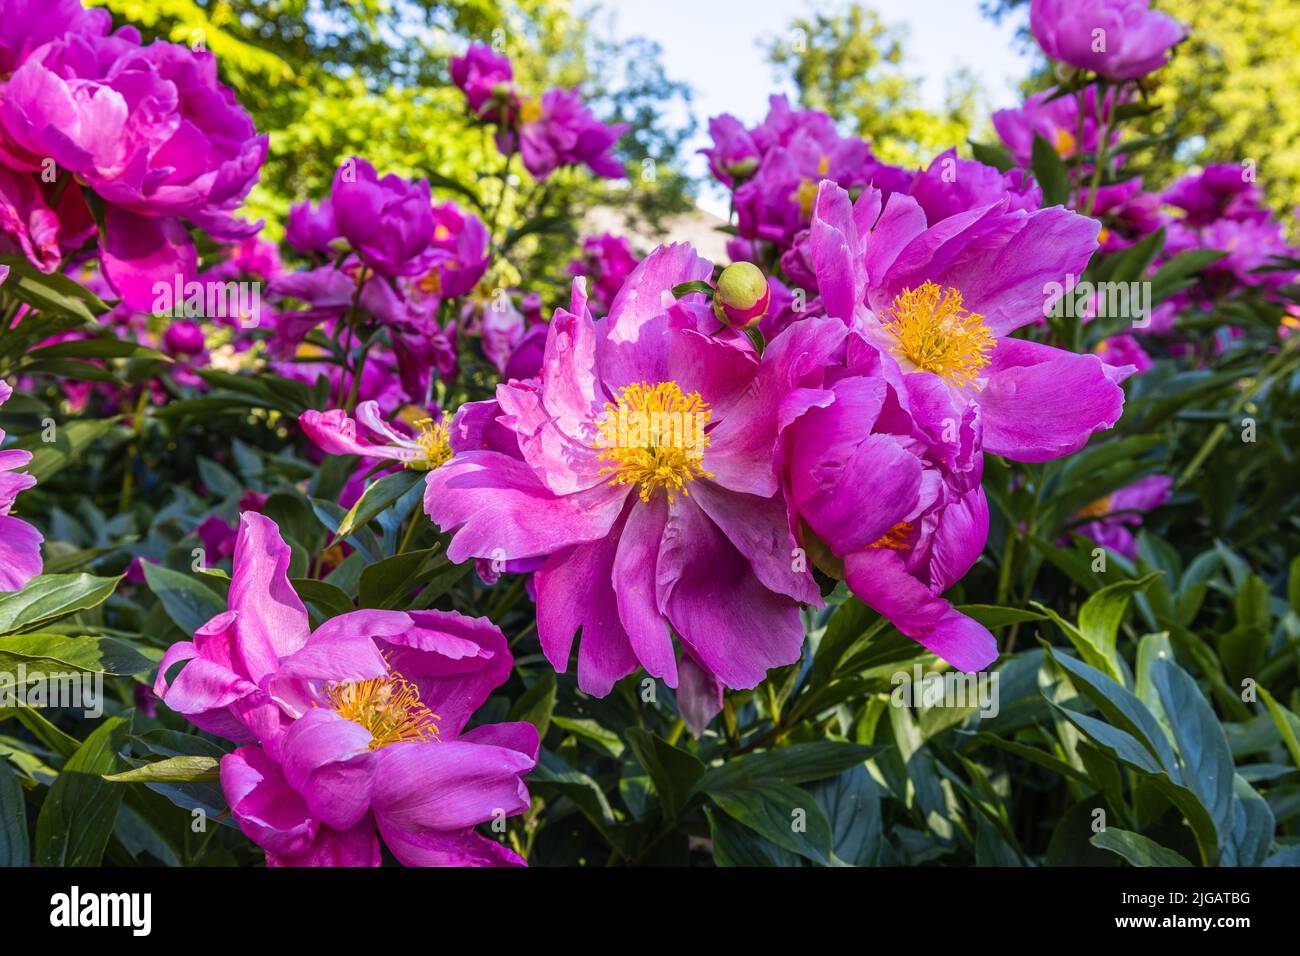 A bush of pink peonies blooms in the garden. Paeonia suffruticosa Stock Photo